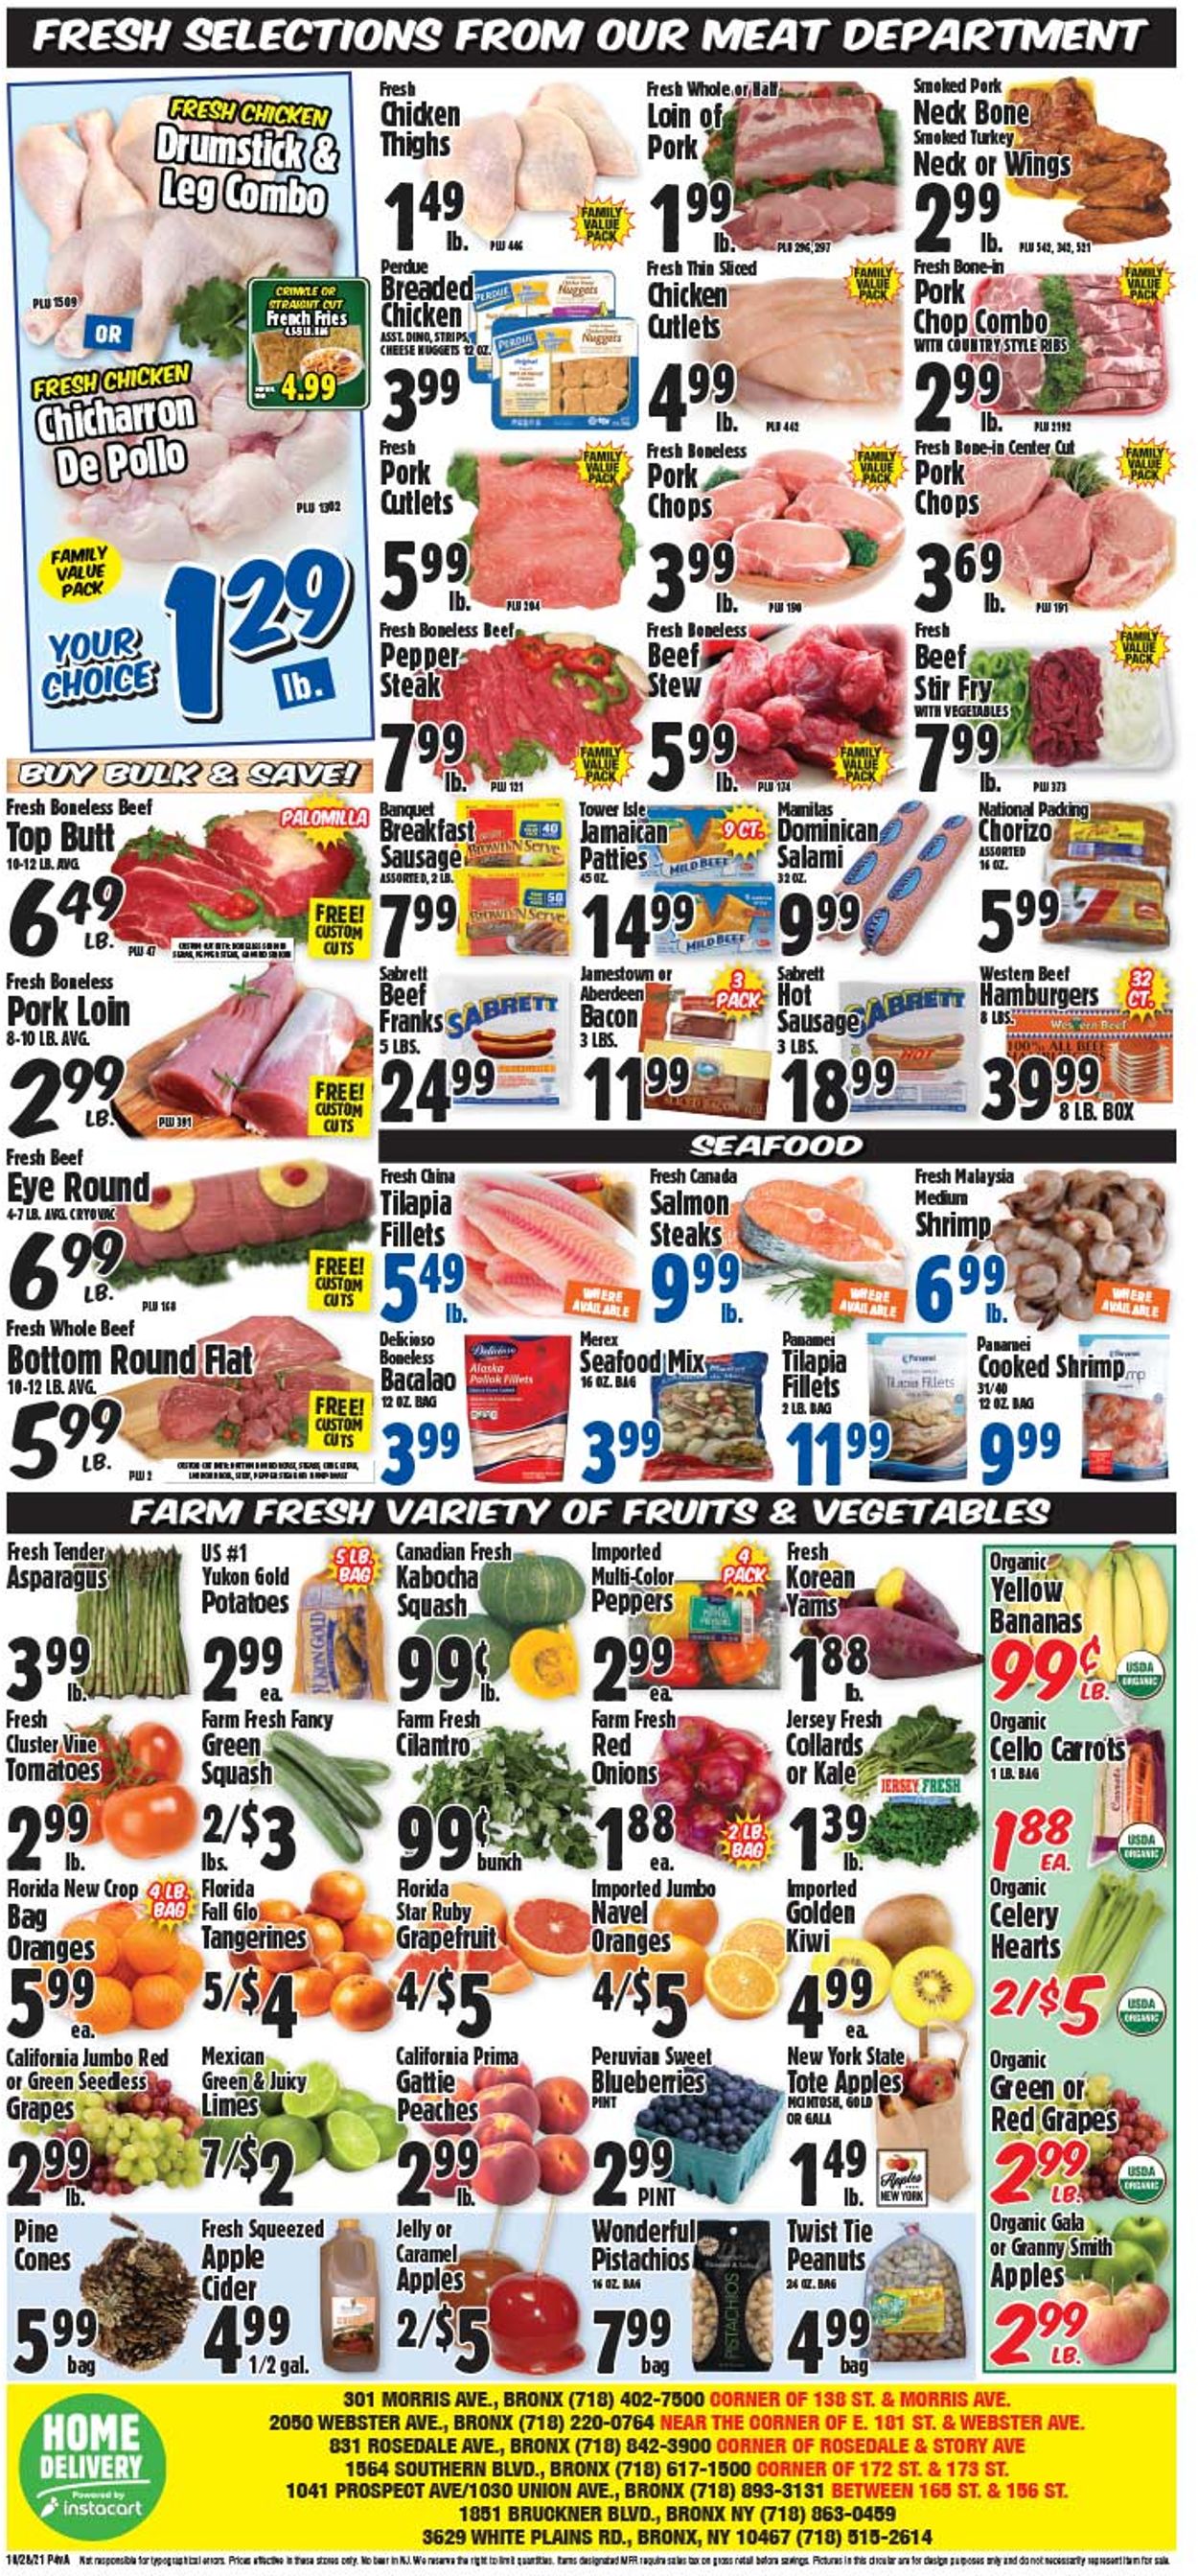 Western Beef Current weekly ad 10/28 - 11/03/2021 [3] - frequent-ads.com